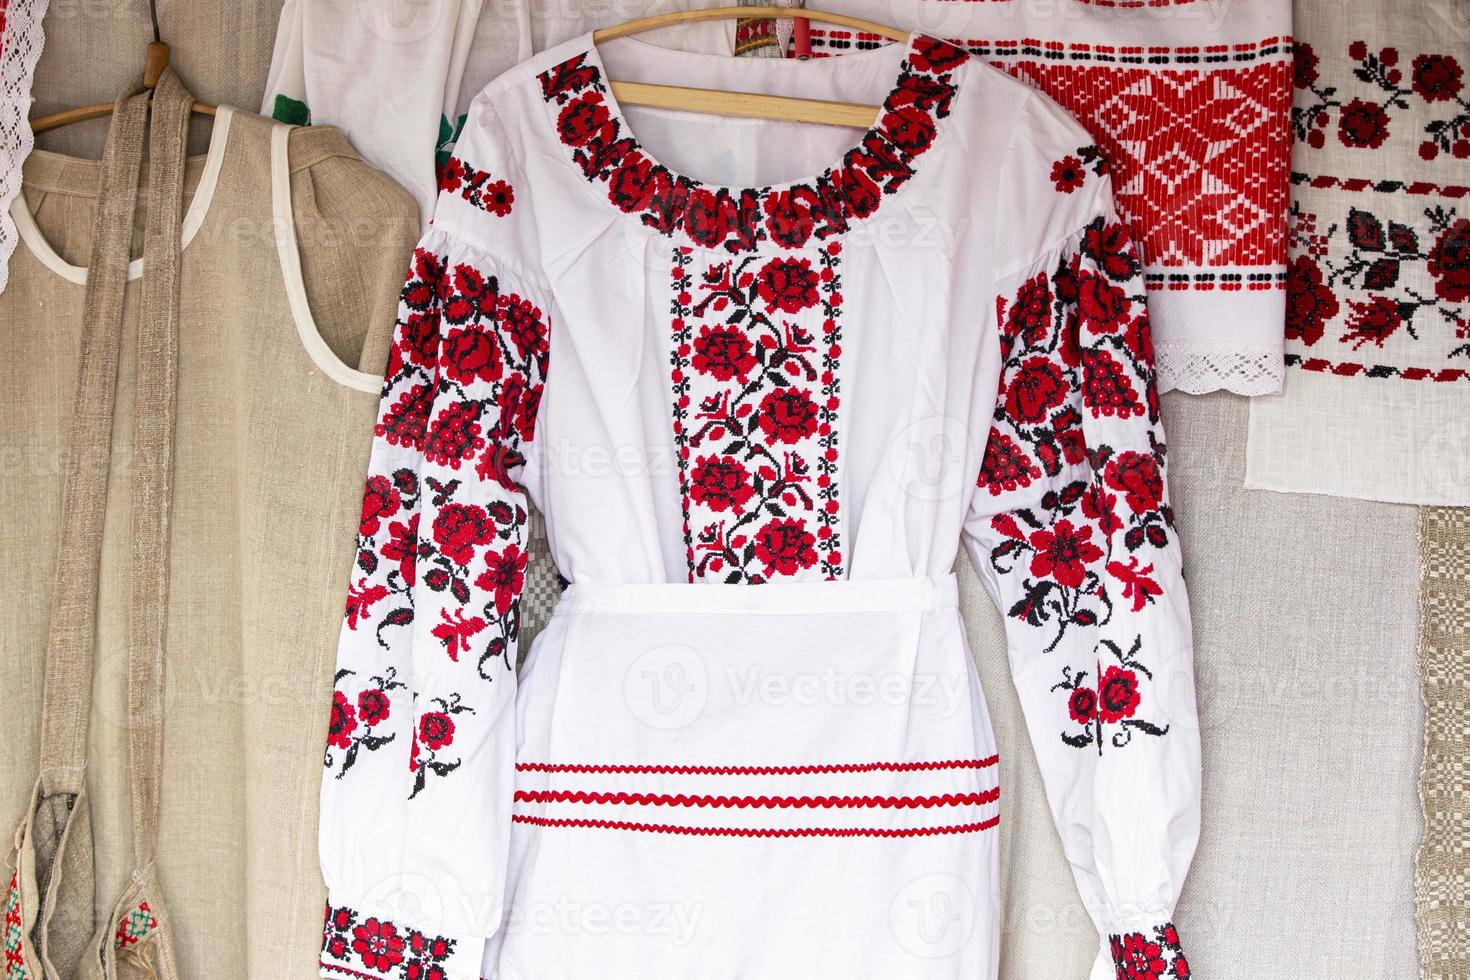 Embroidered national Belarusian dress. Slavic national women's clothing. photo